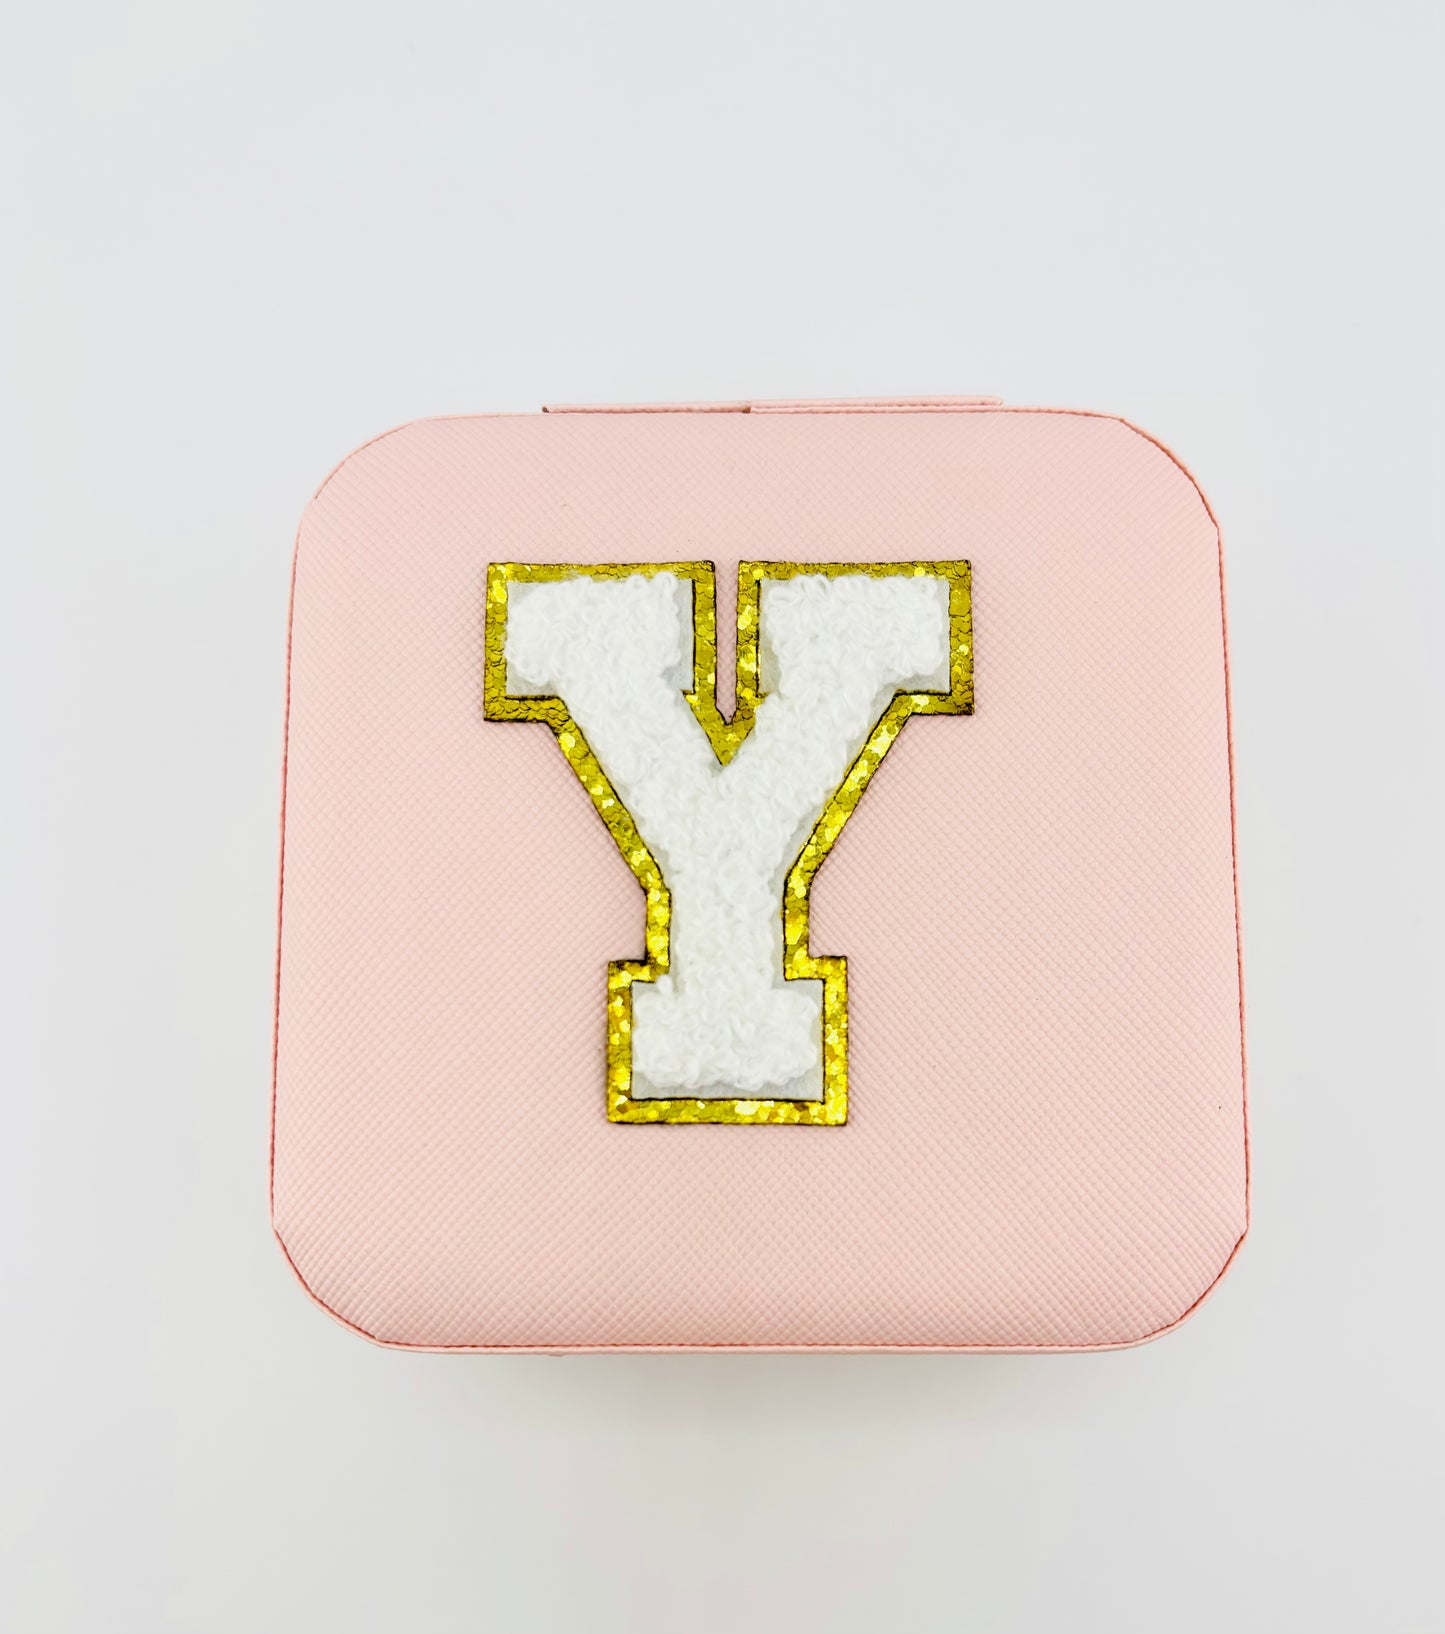 Letter Y travel jewelry case in pink